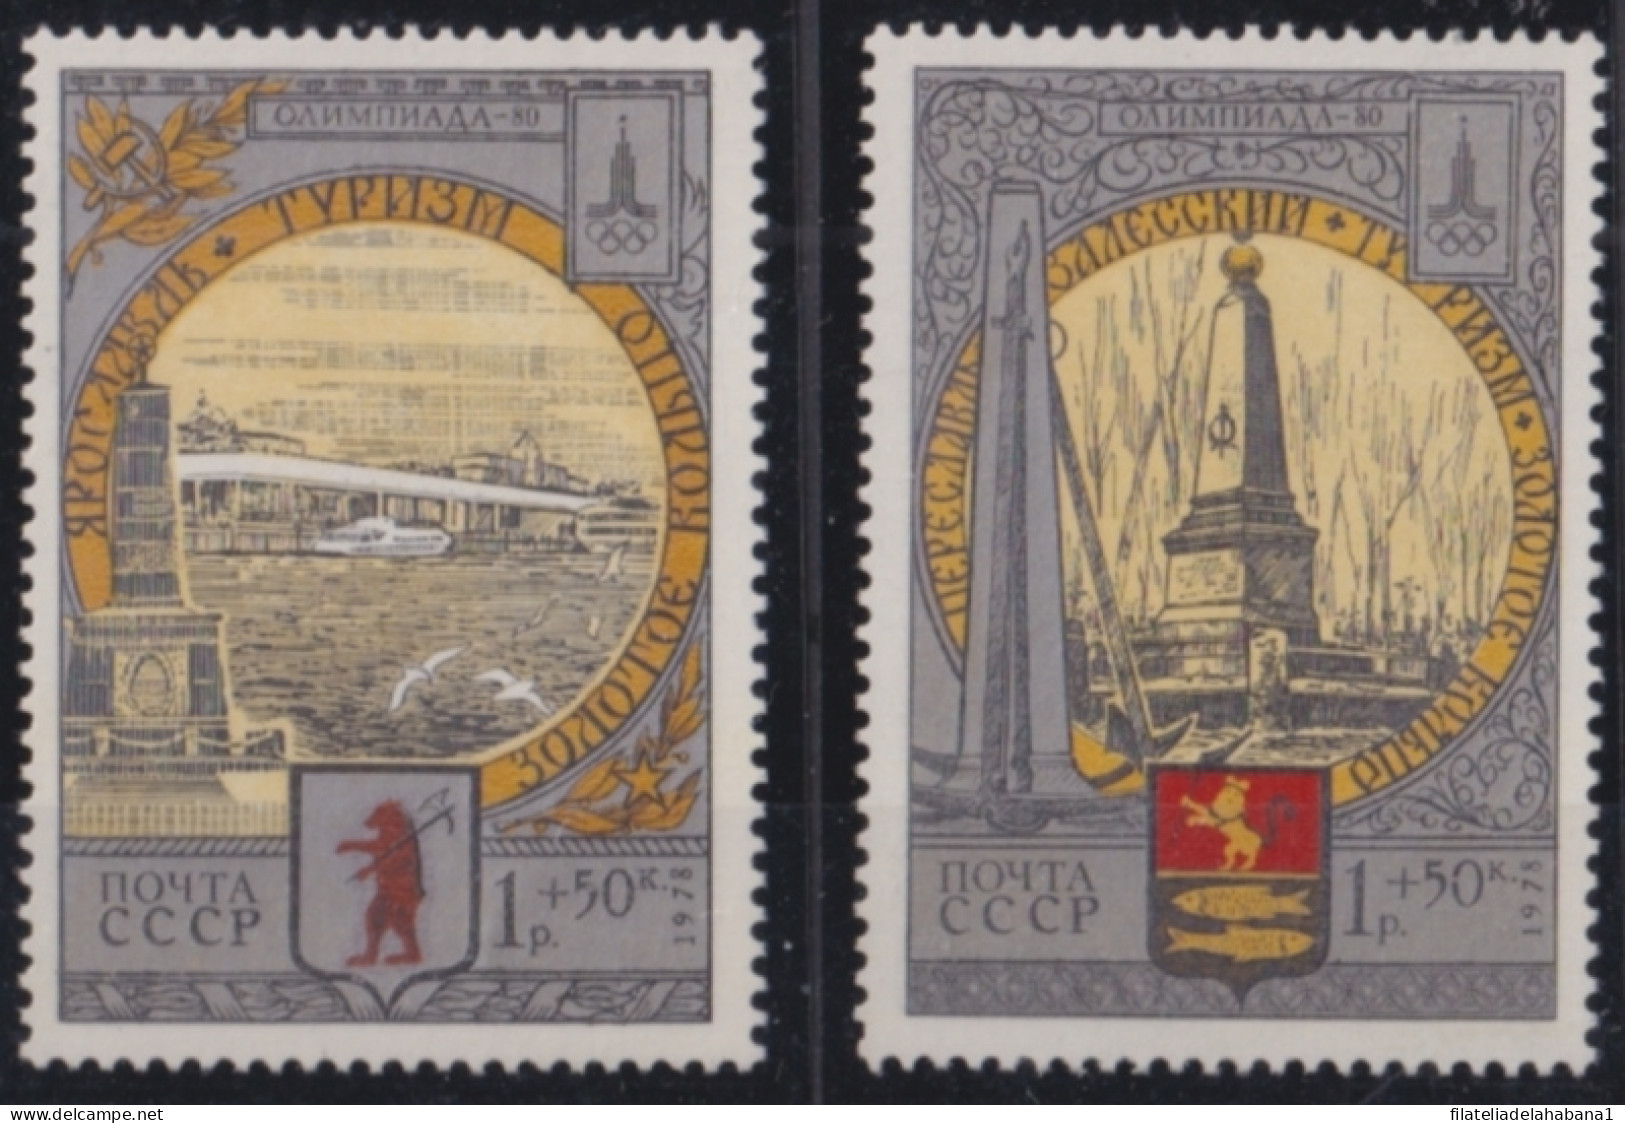 F-EX50227 RUSSIA MNH 1978 OLYMPIC GAMES MOSCOW TOURISM CITY.  - Ete 1980: Moscou